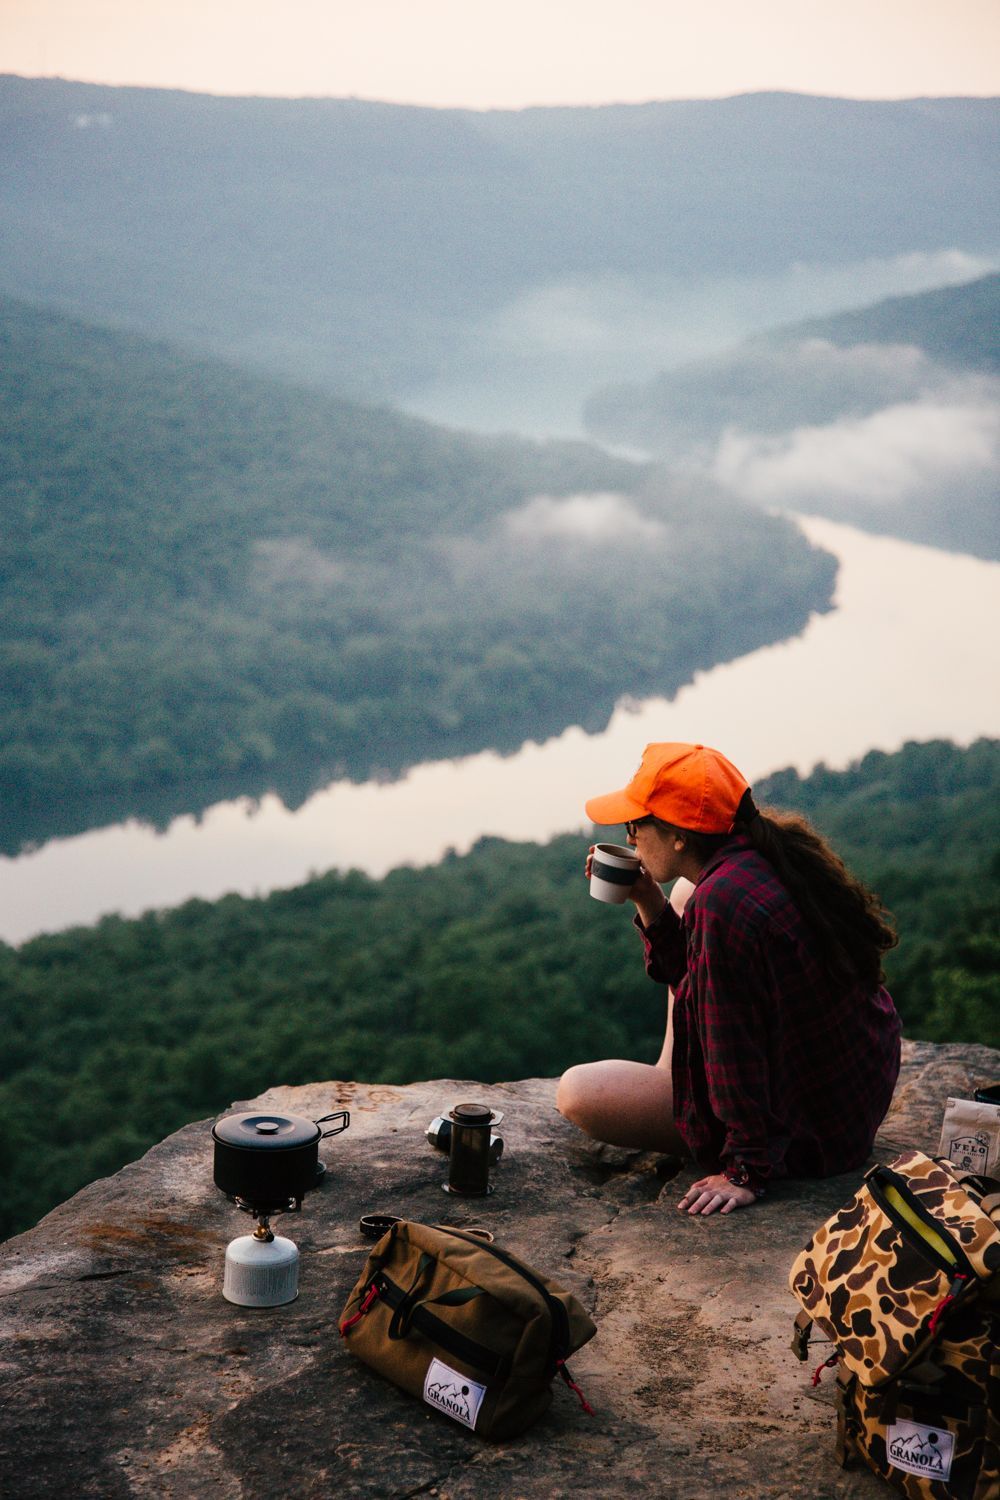 Good Morning Chattanooga! Coffee and a view, any better way to start of the day? @Granola Products @RootsR